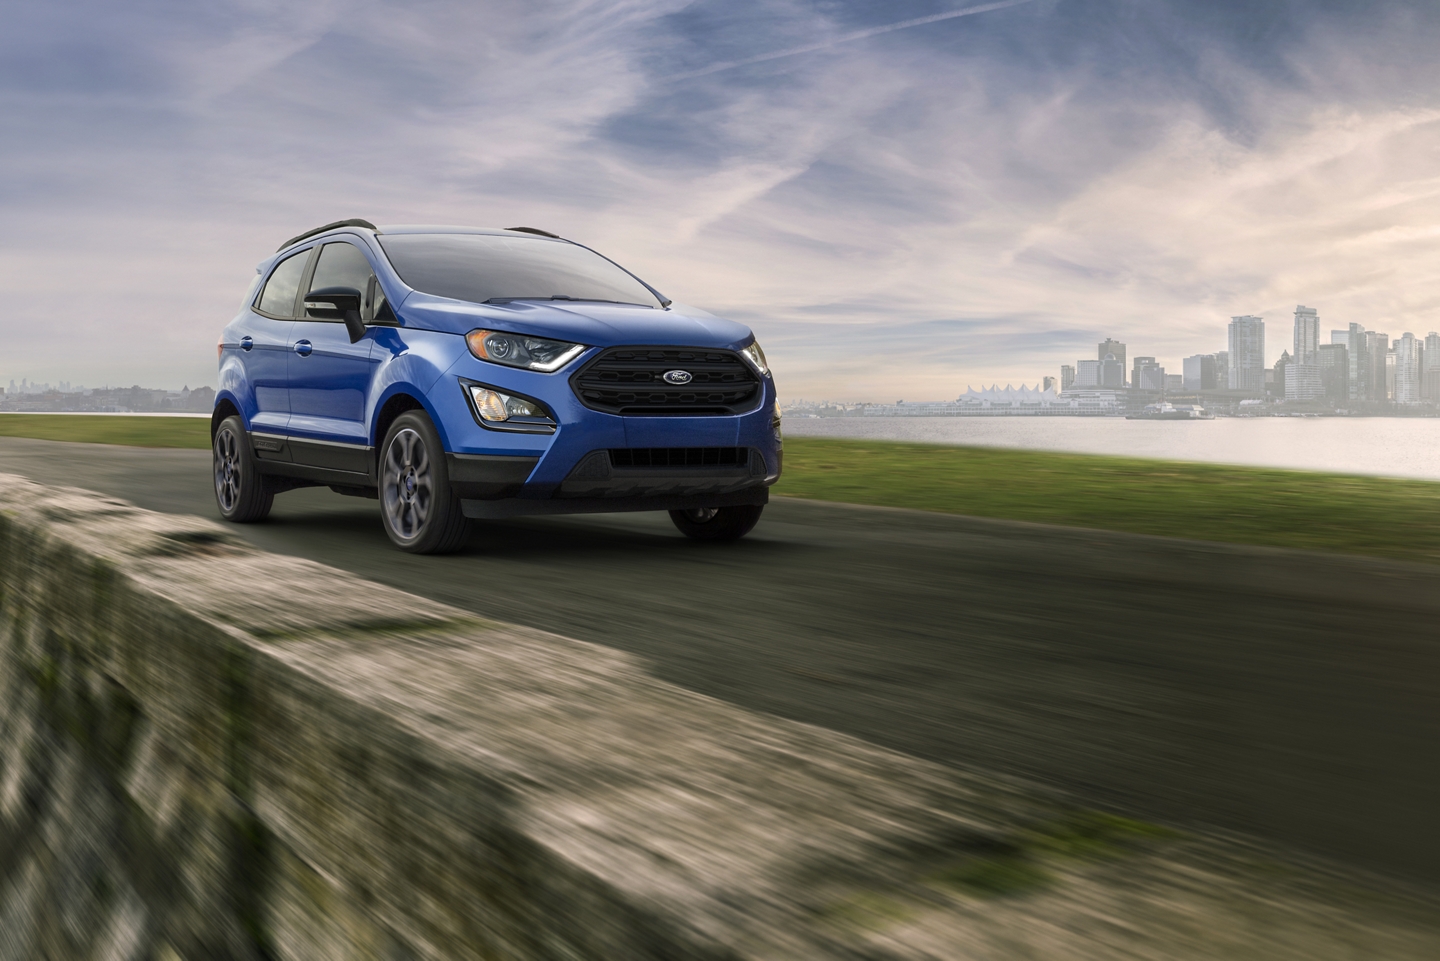 Trim Levels of the 2020 Ford EcoSport